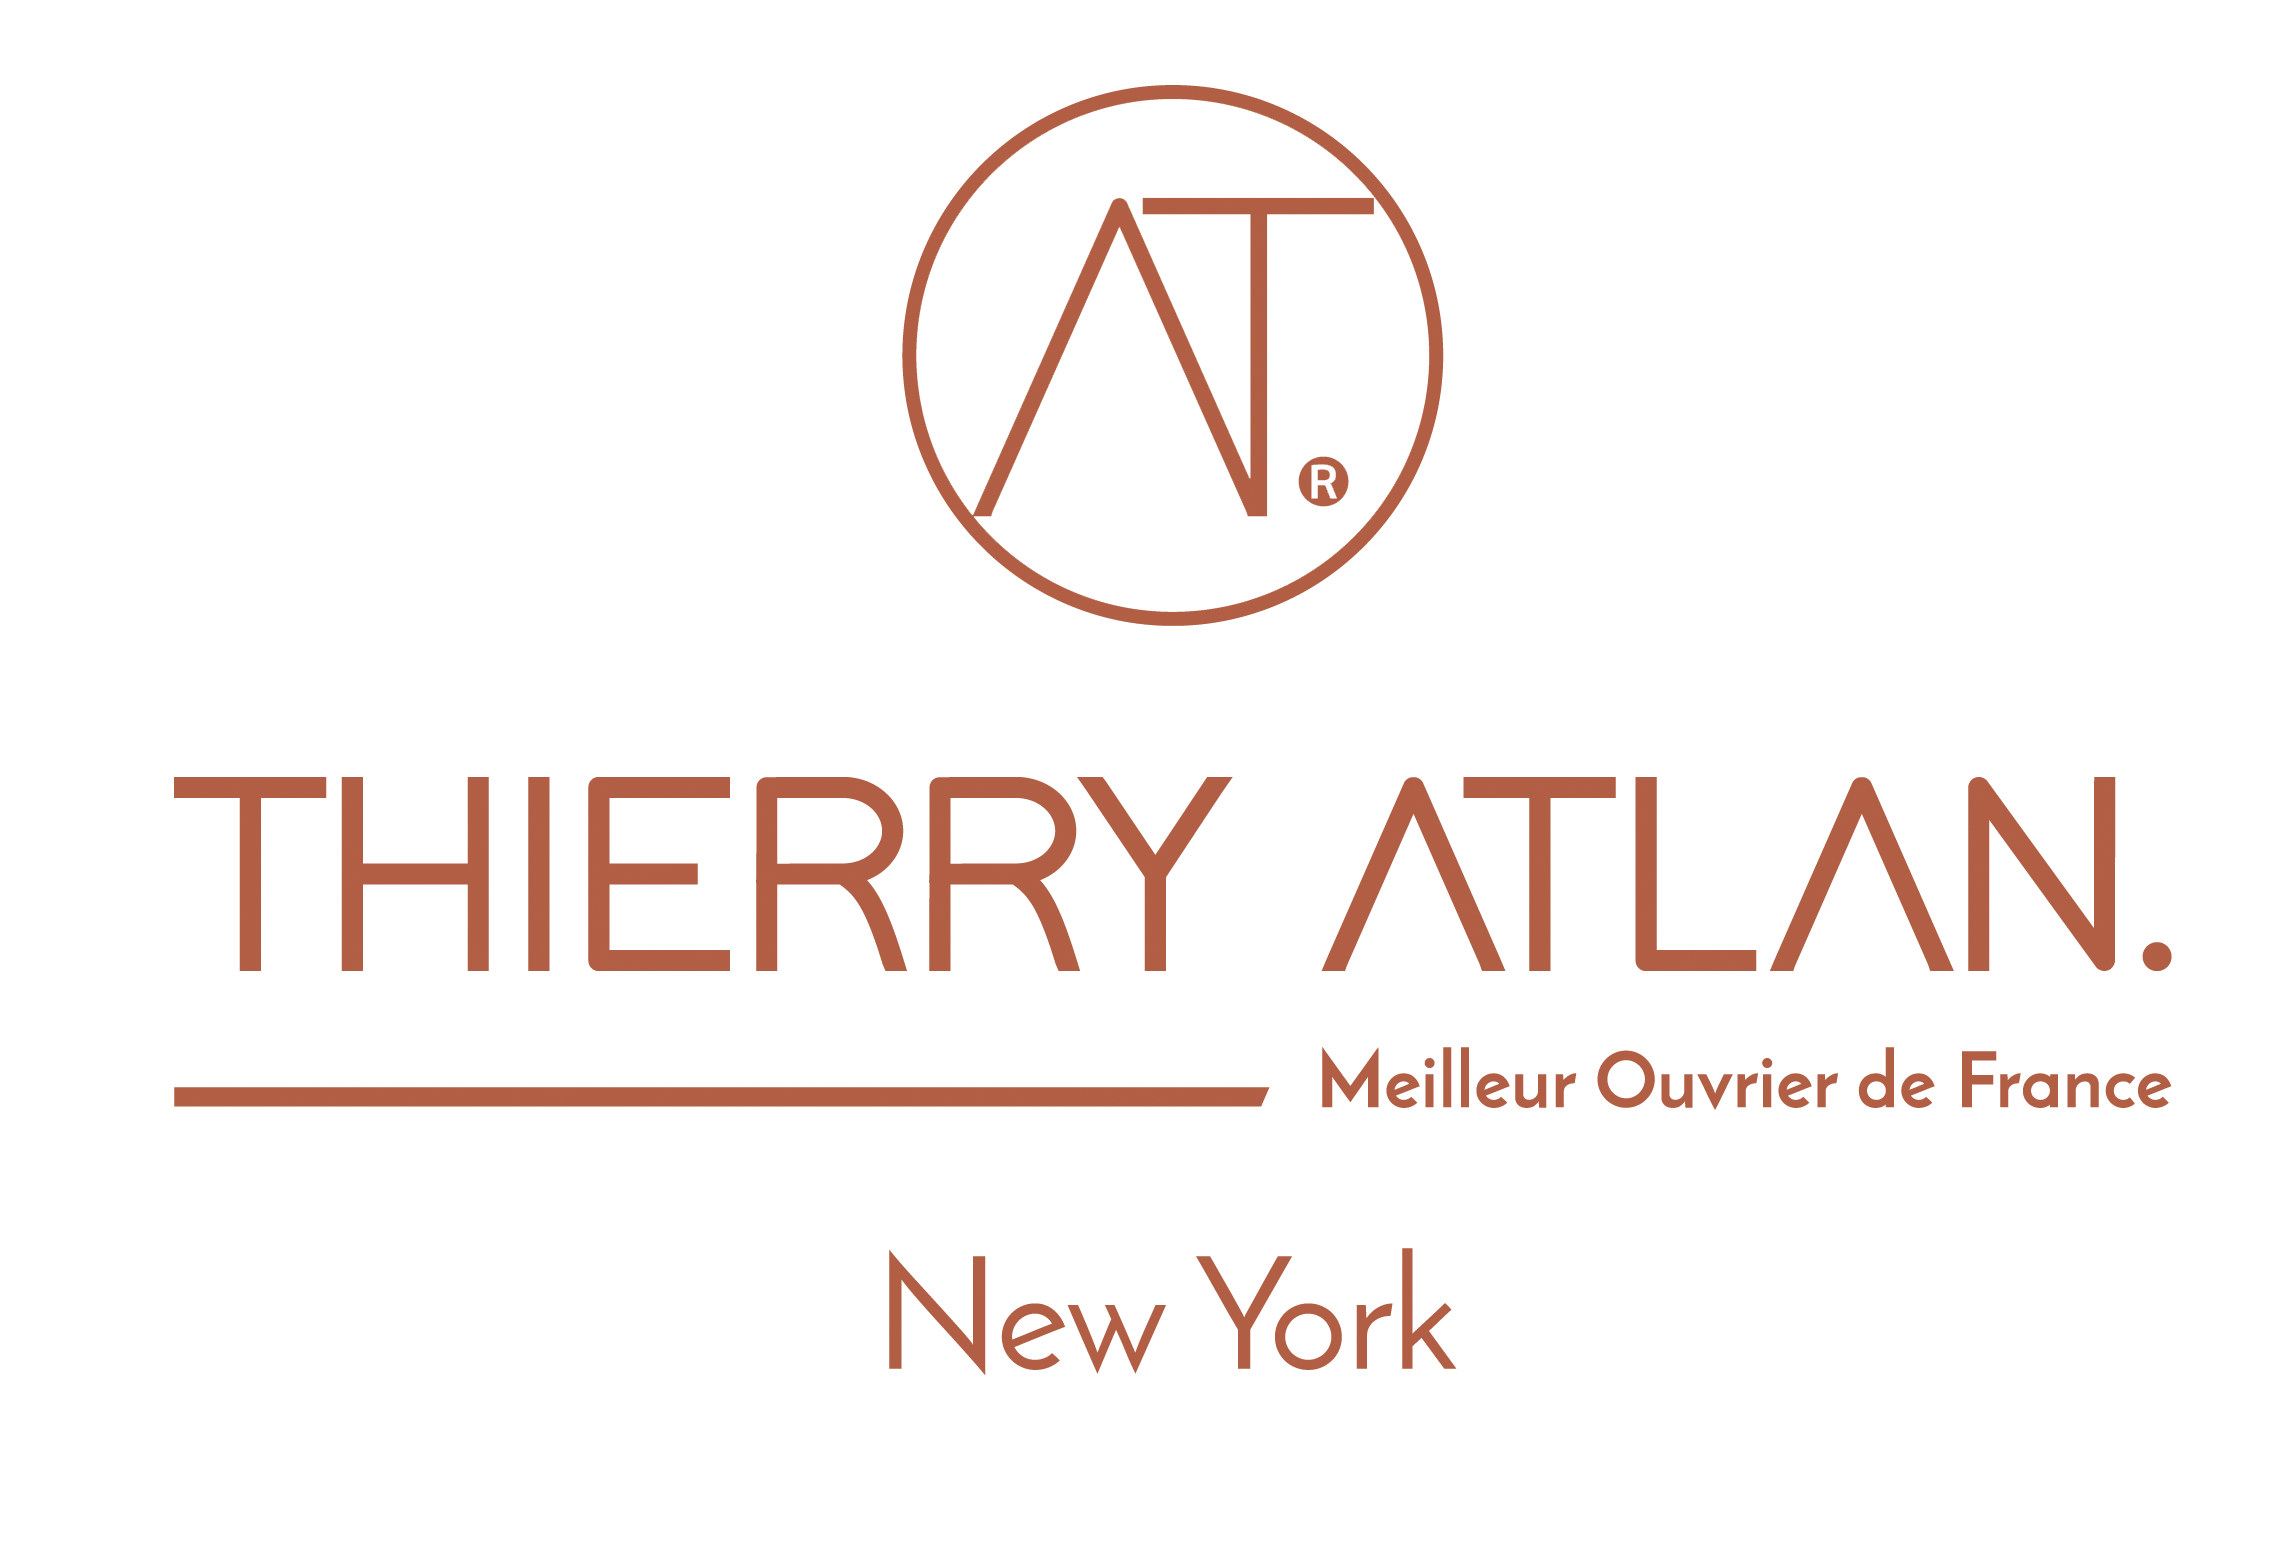 Thierry Atlan 436 West Broadway